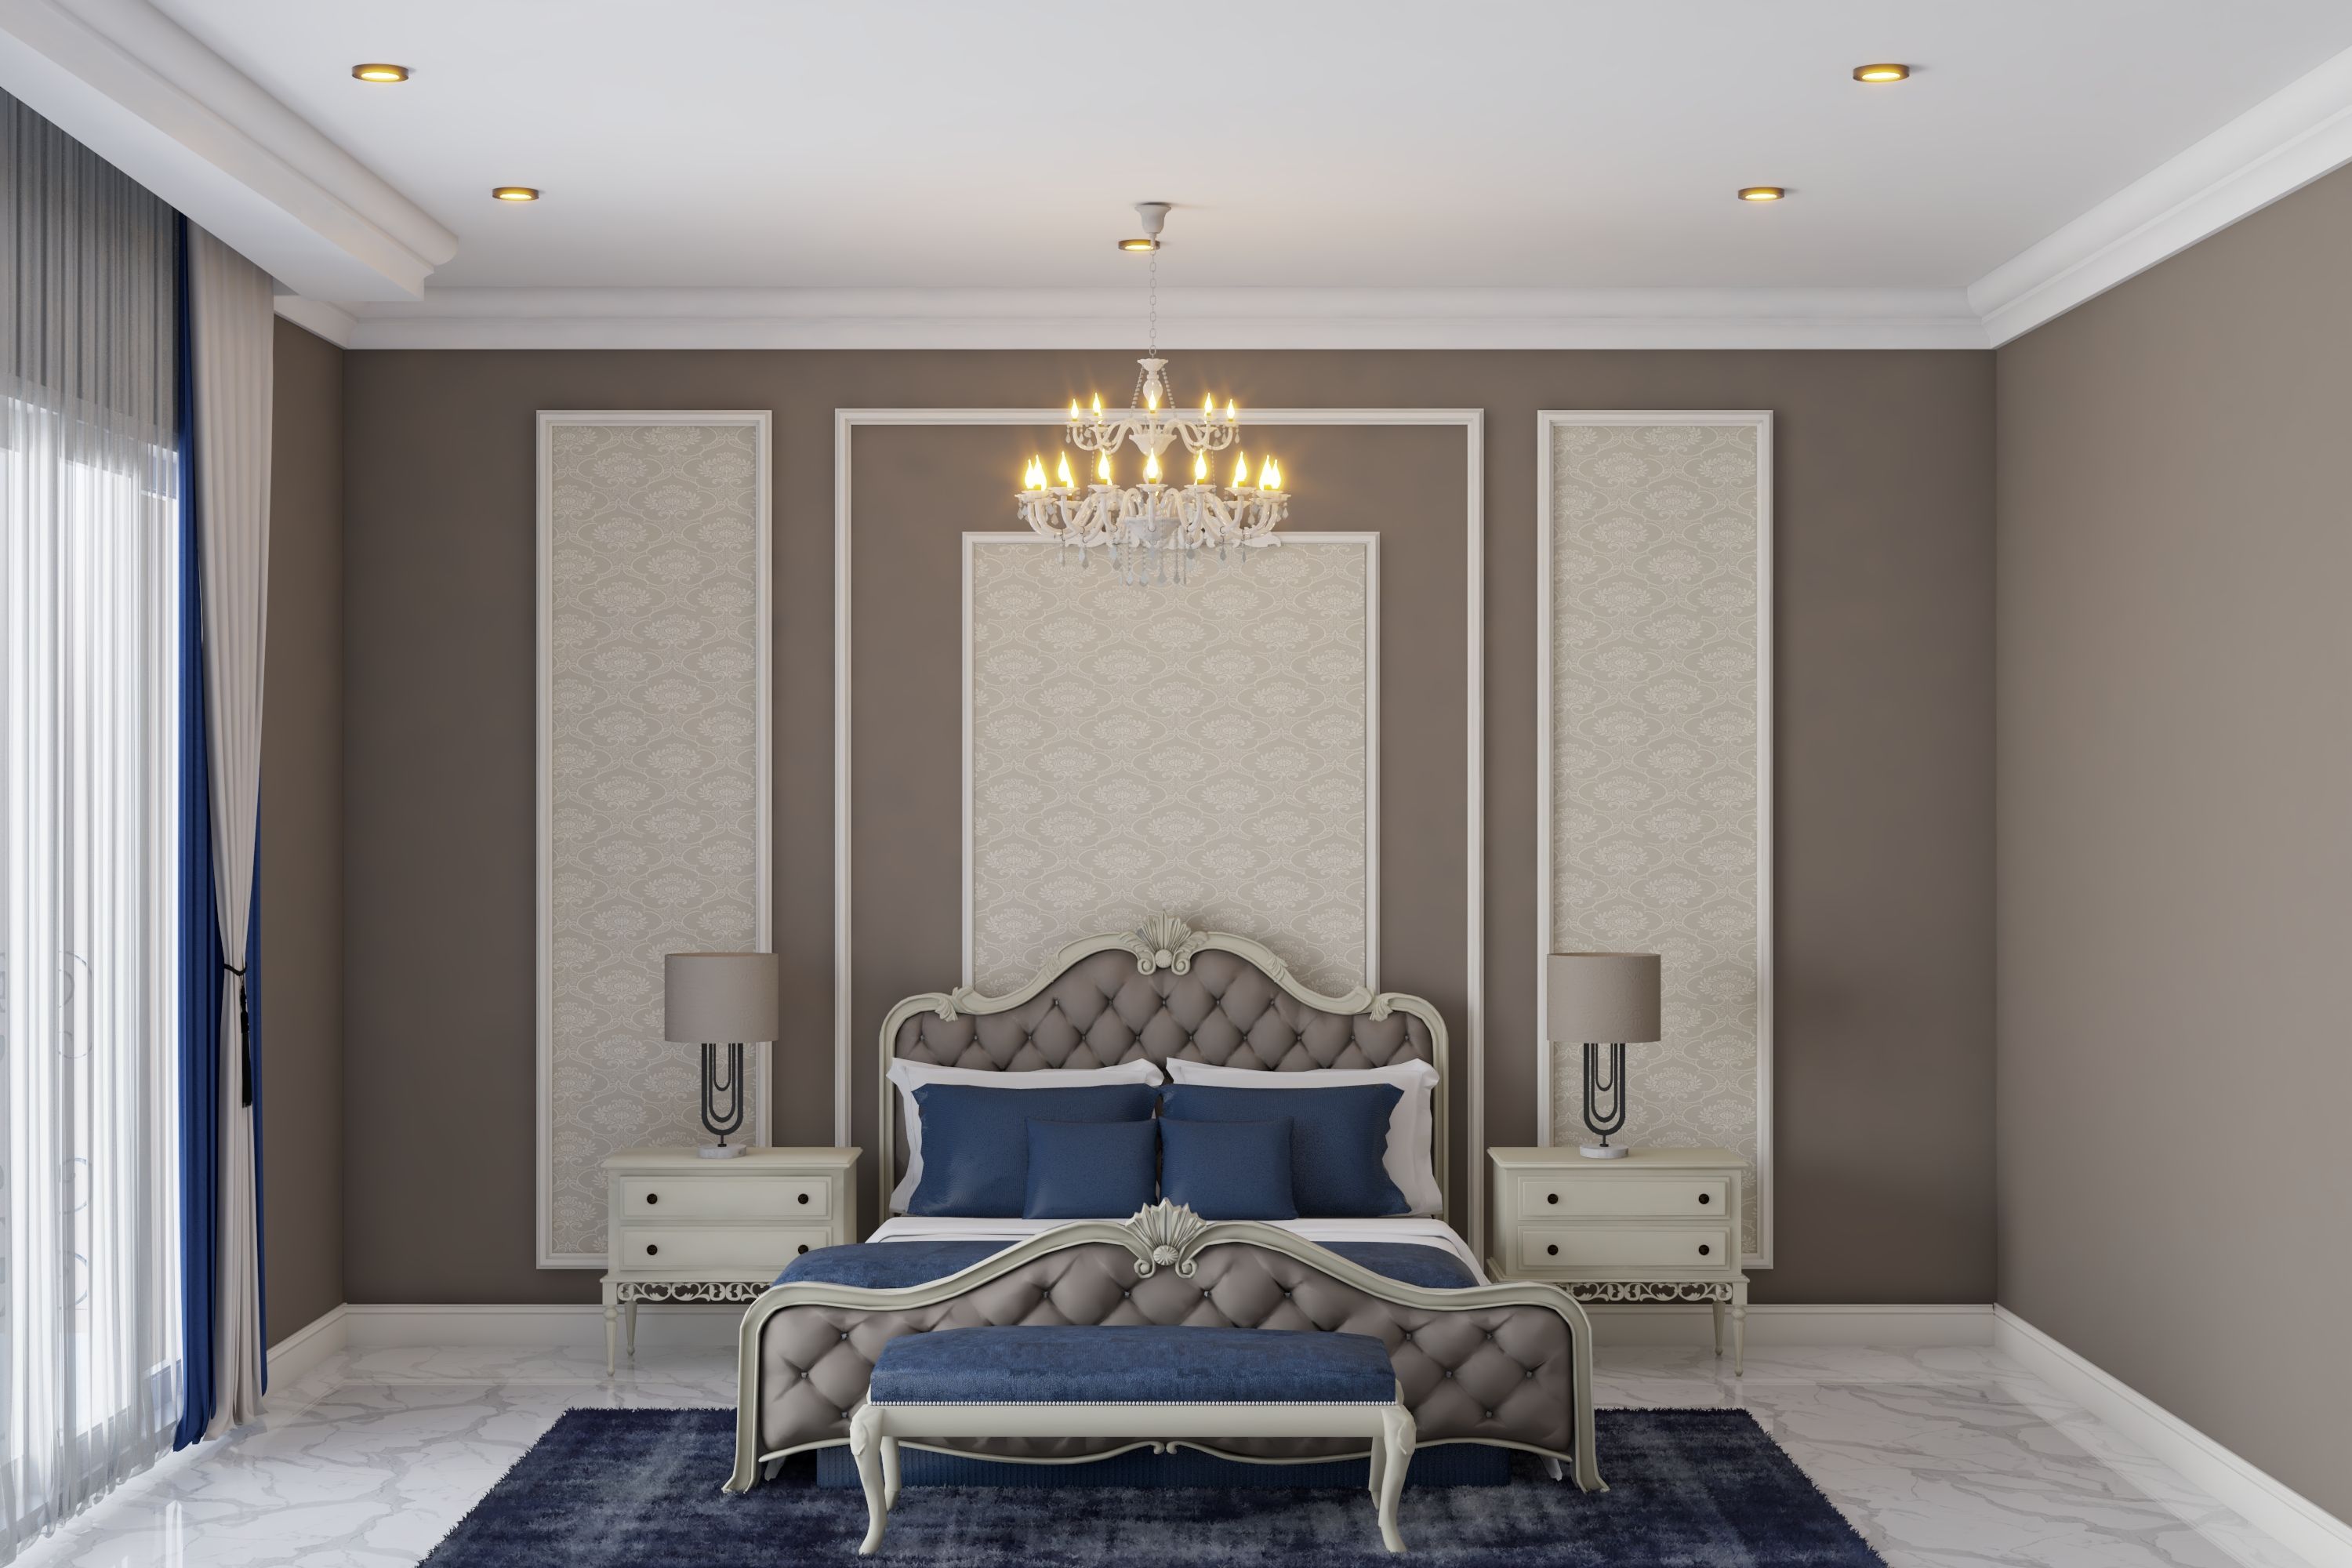 Traditional Master Bedroom Design With Wall Trims